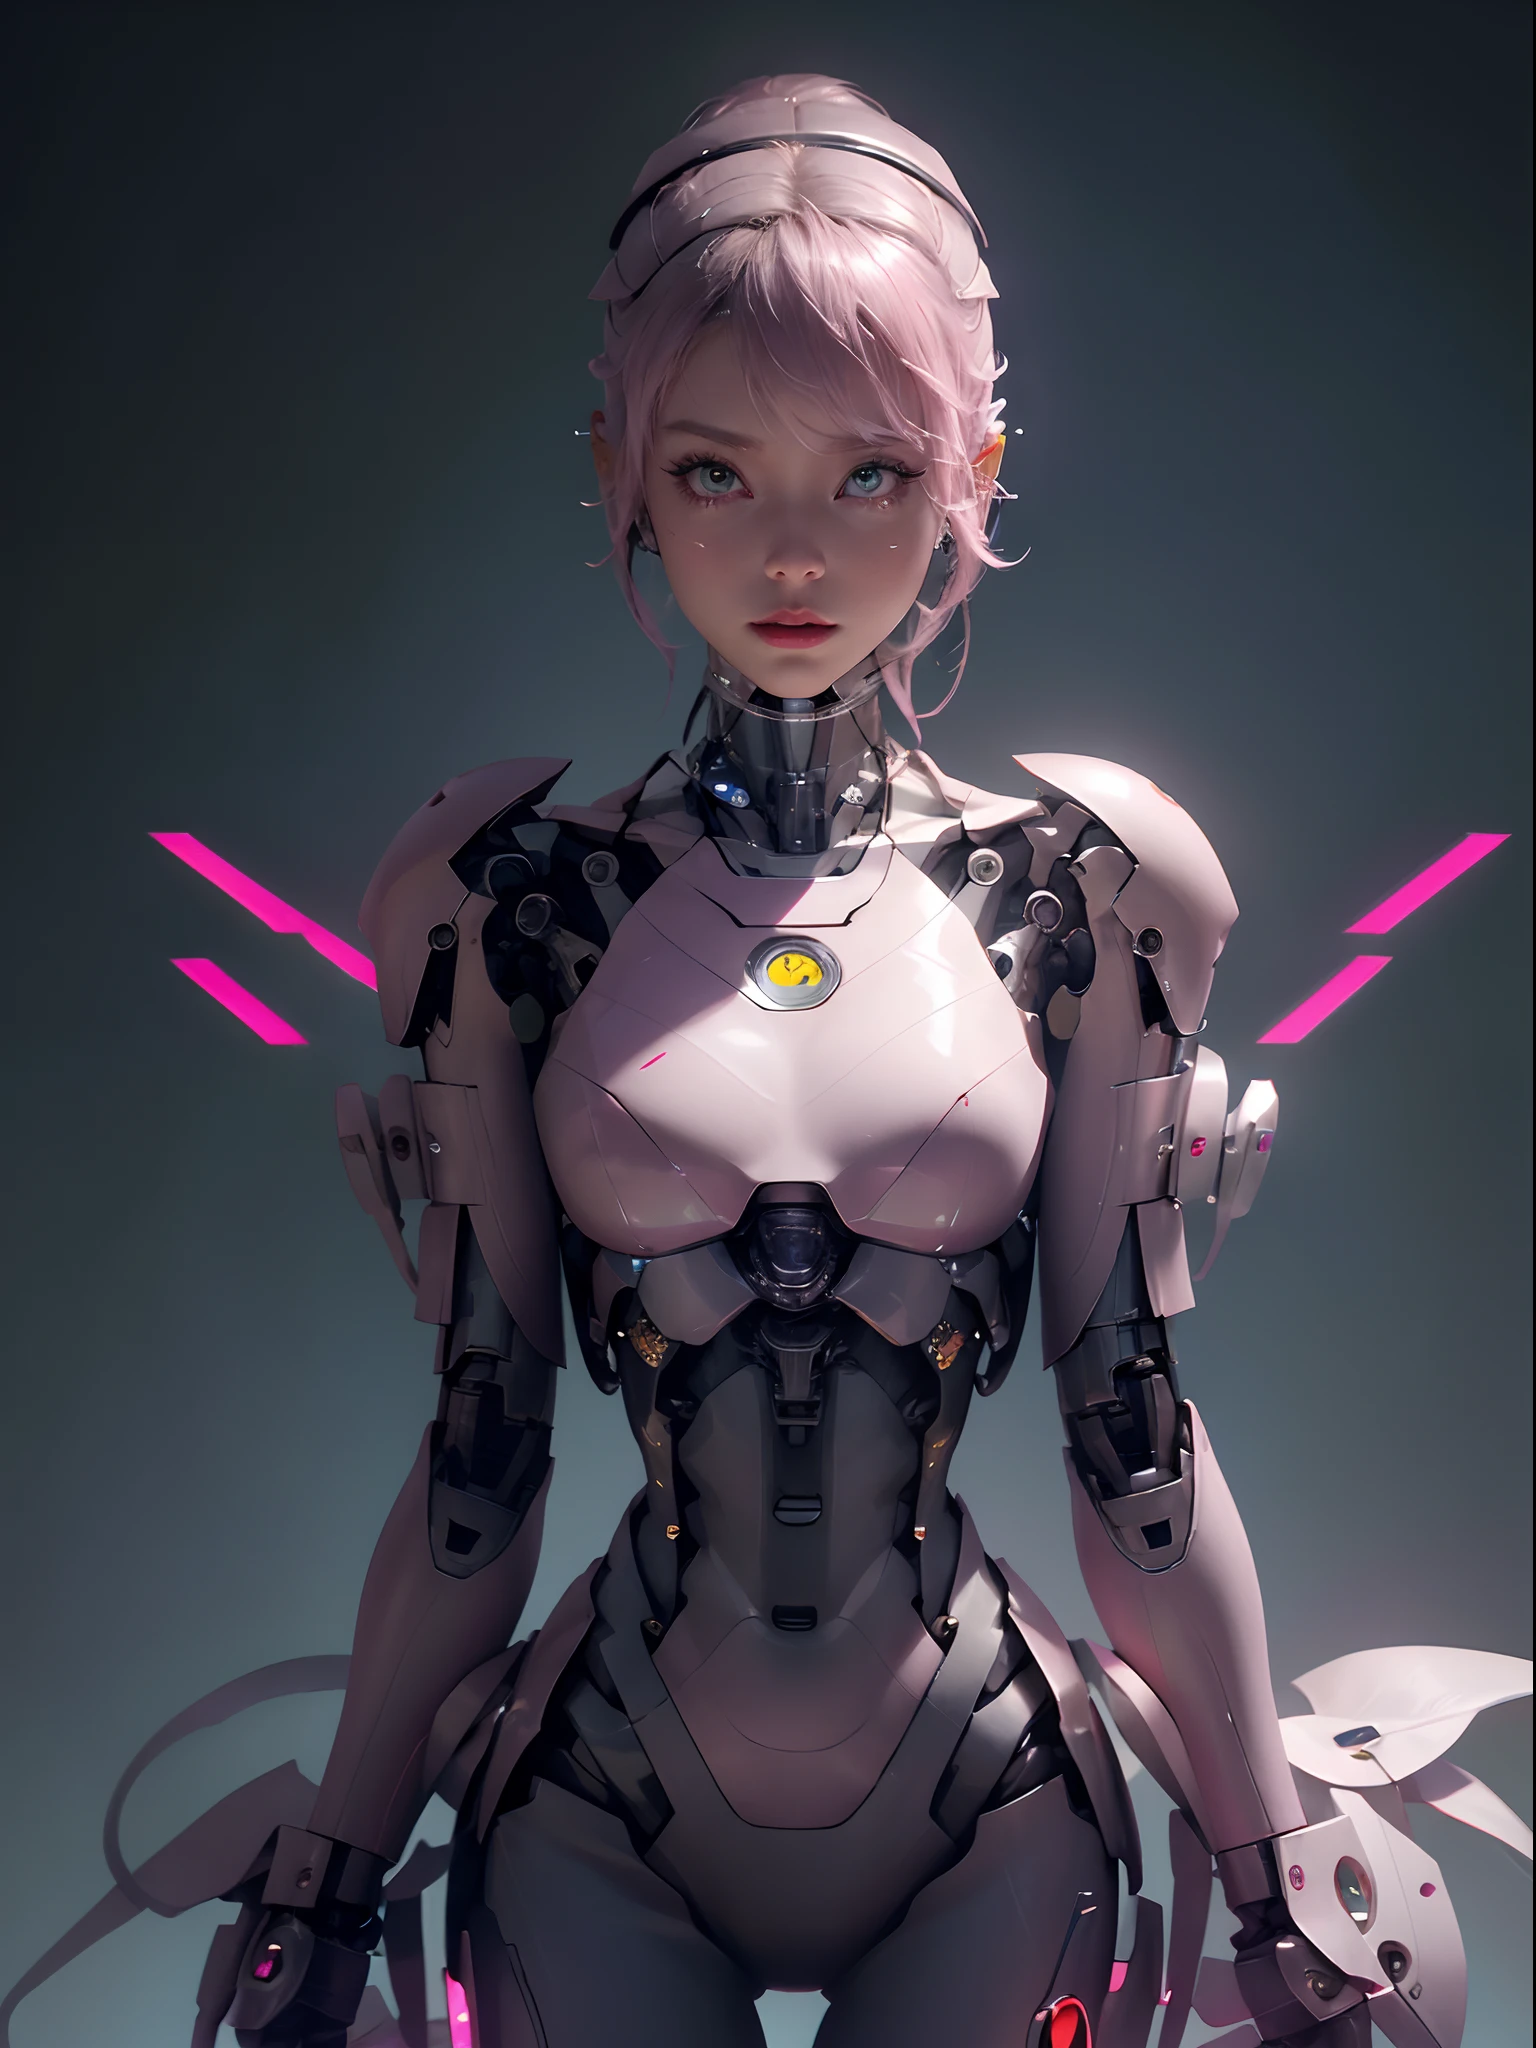 Close-up of a woman holding a sword in a pink costume, Cute cyborg girl, perfect android girl, Beautiful robot character design, beautiful female android!, Ross Tran 8 K, Streamlined pink armor, beautiful girl cyborg, girl in mecha cyber armor, Beautiful white girl cyborg, anime robotic mixed with organic, author：ross tran, Cyborg girl
Wait for it to boot up